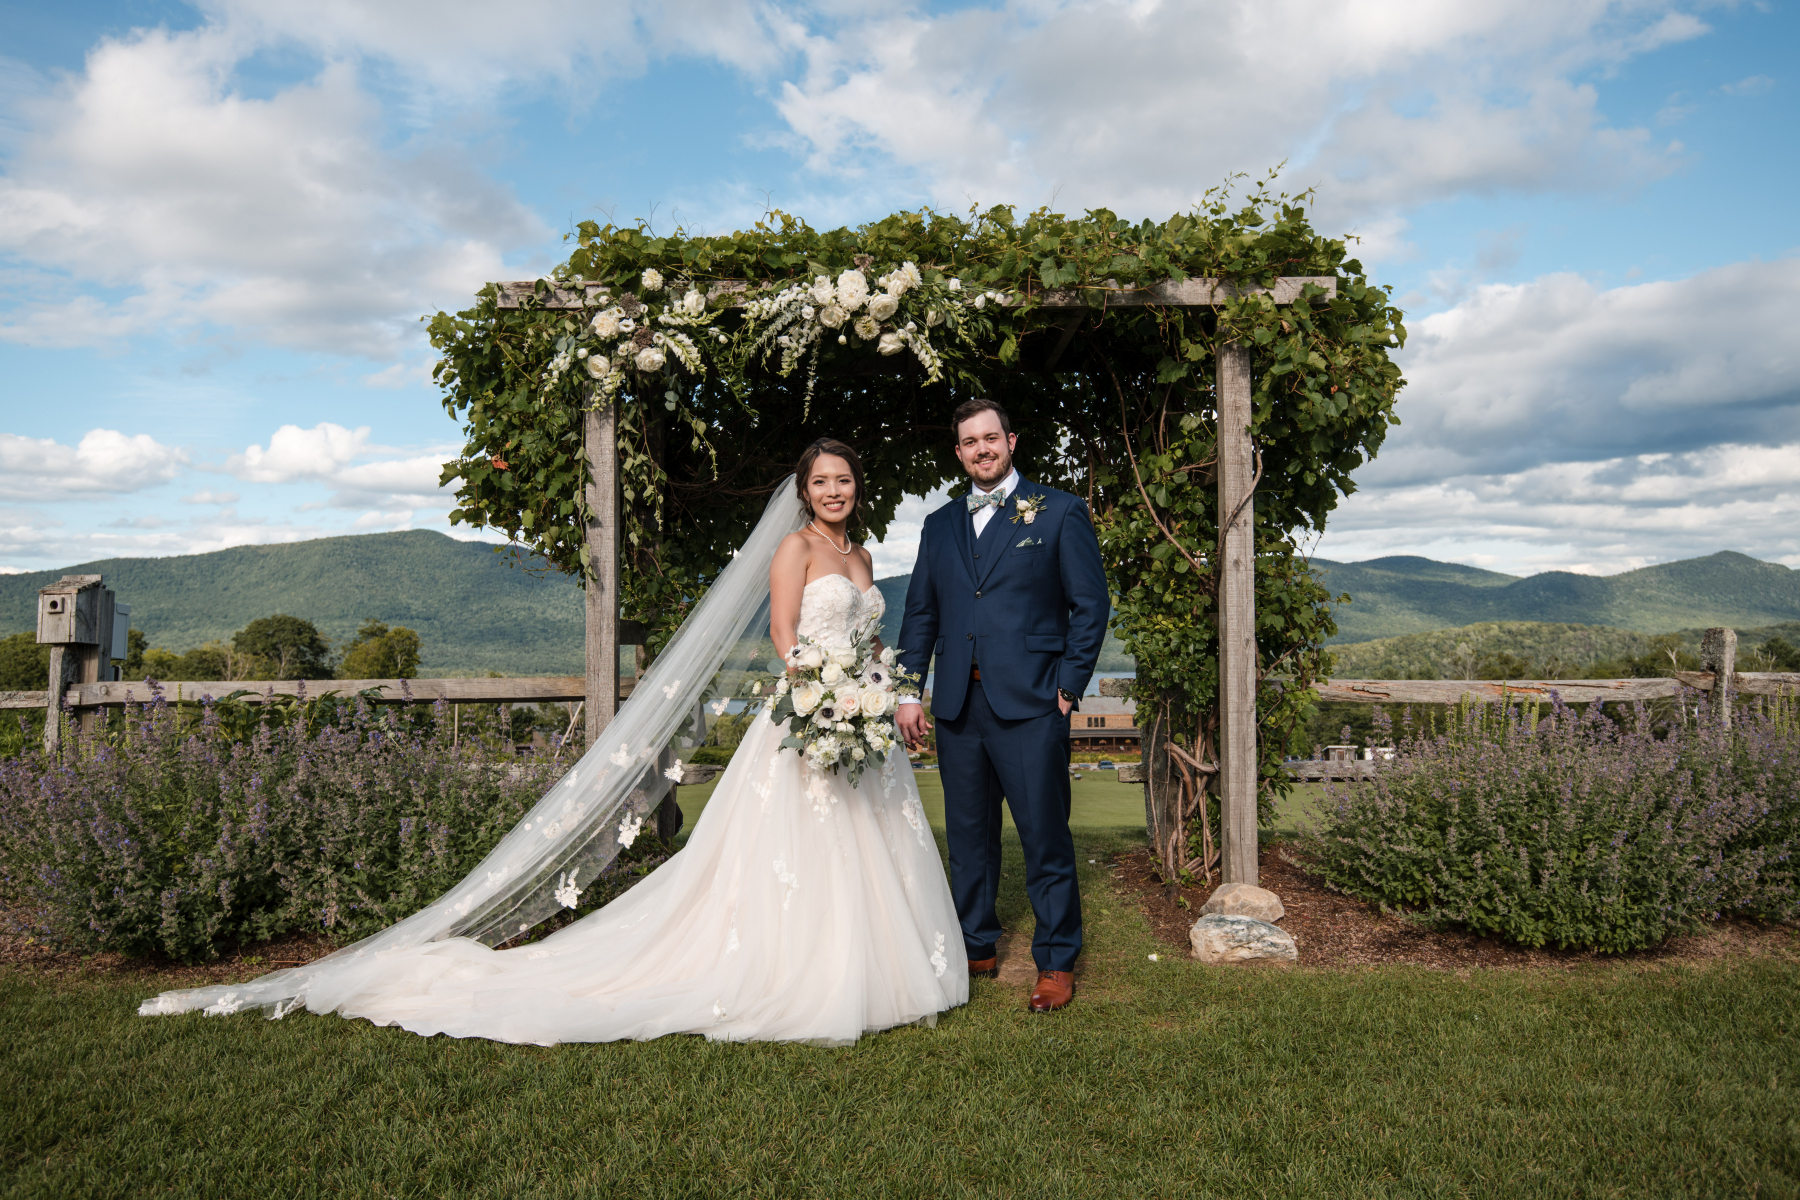 Bride in white, groom in dark suit, standing in front of arbor with greenery and white flowers.